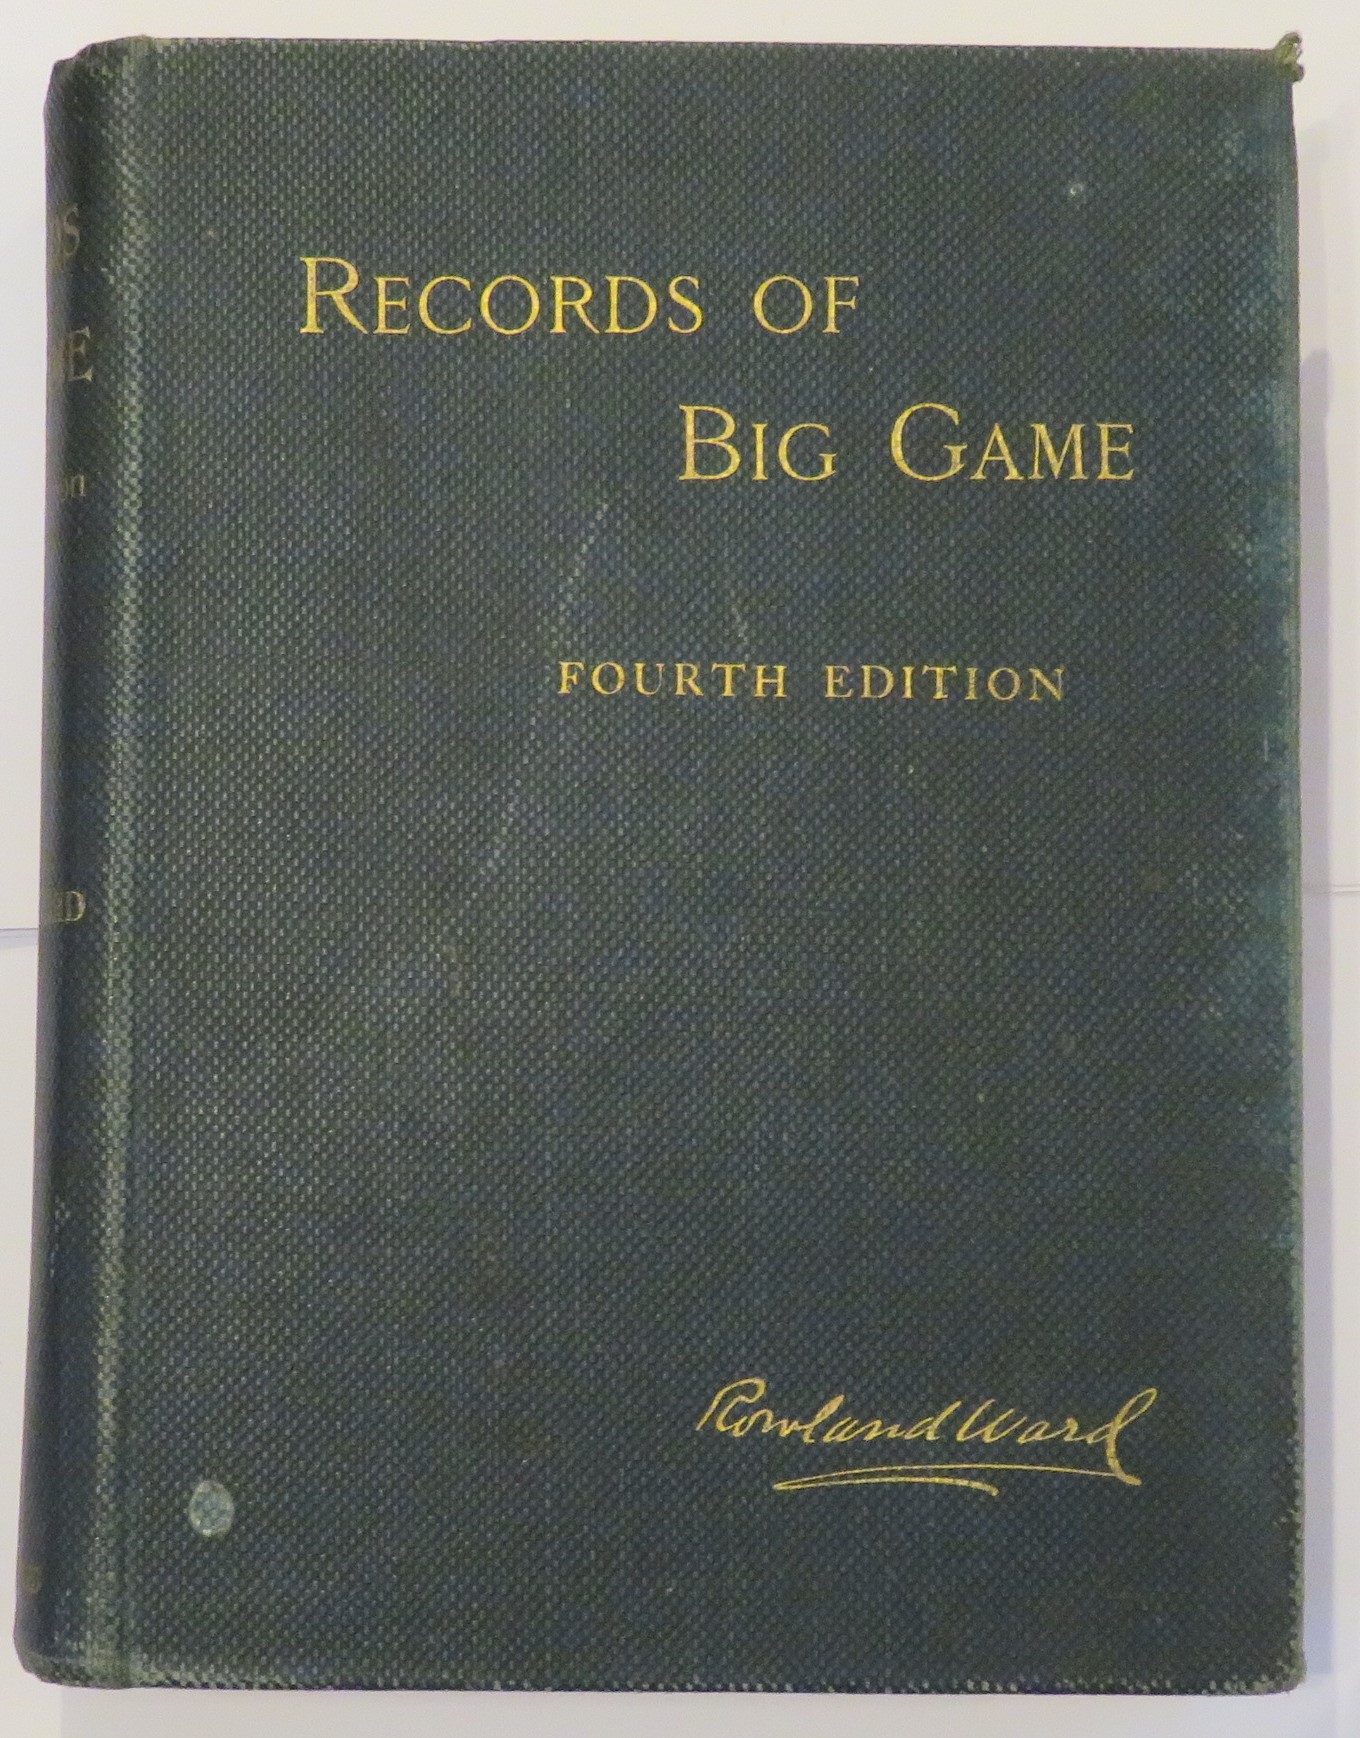 Records of Big Game Fourth Edition